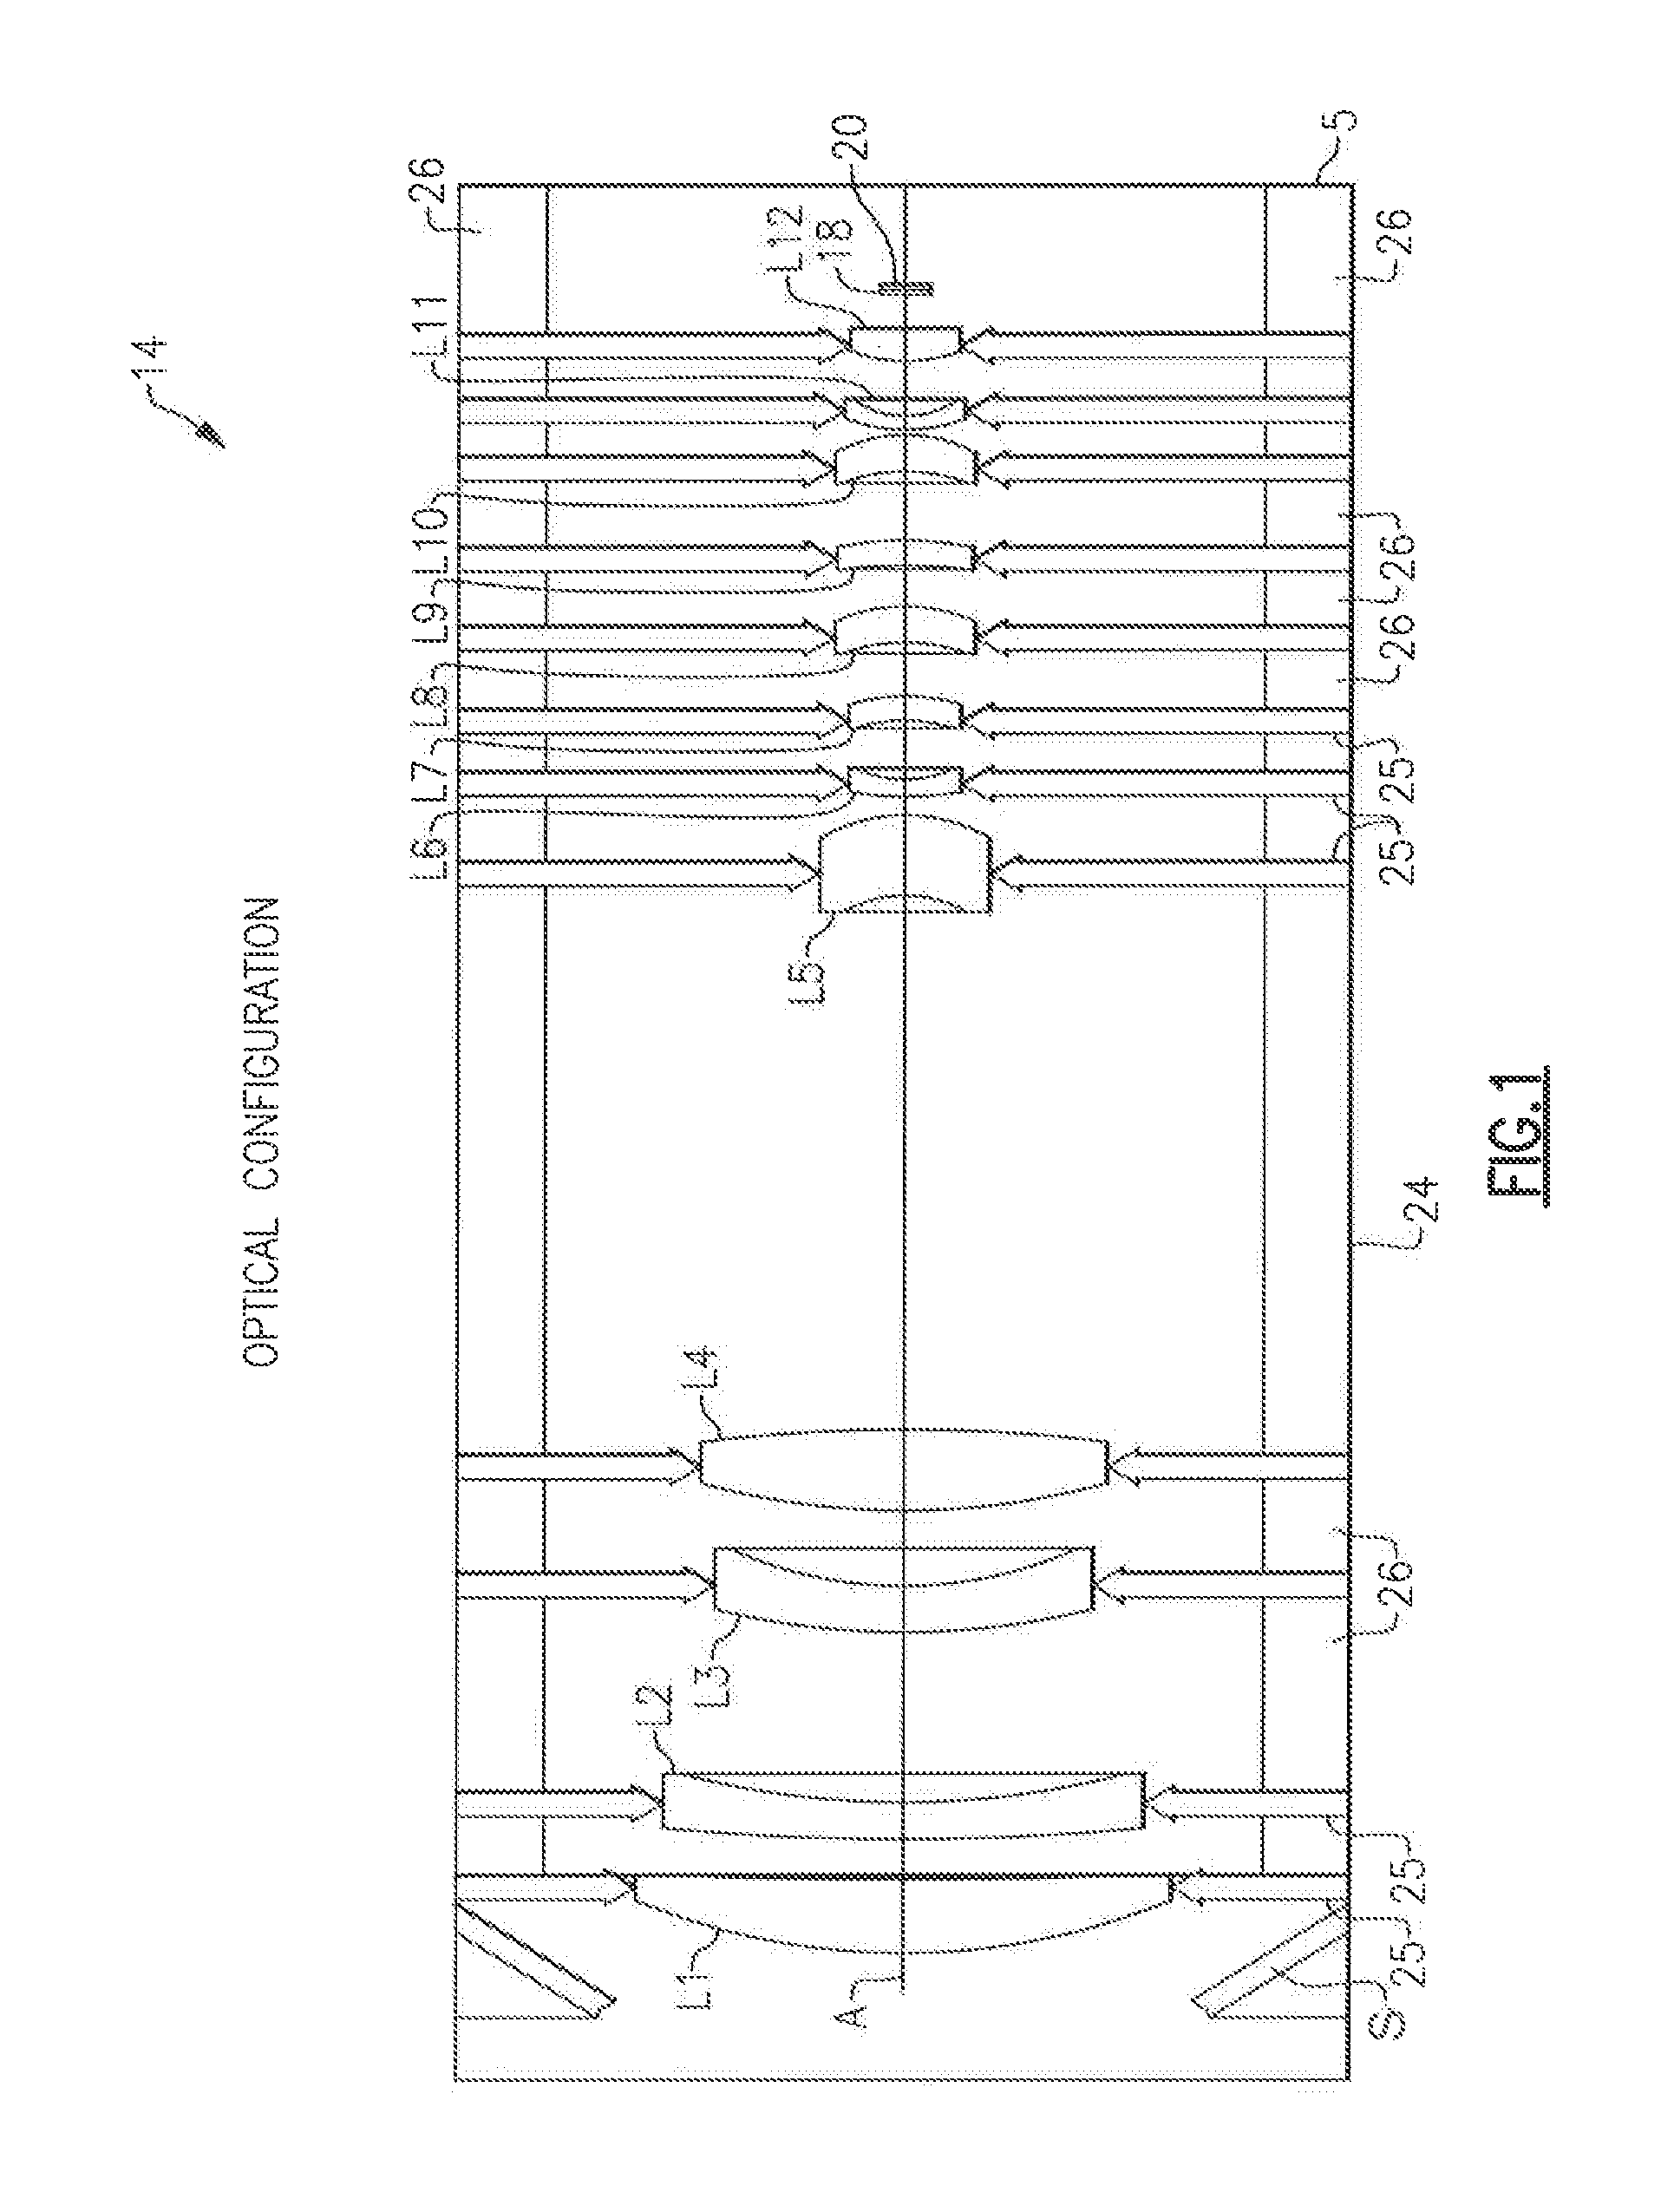 Dual-band passively athermal optical lens system